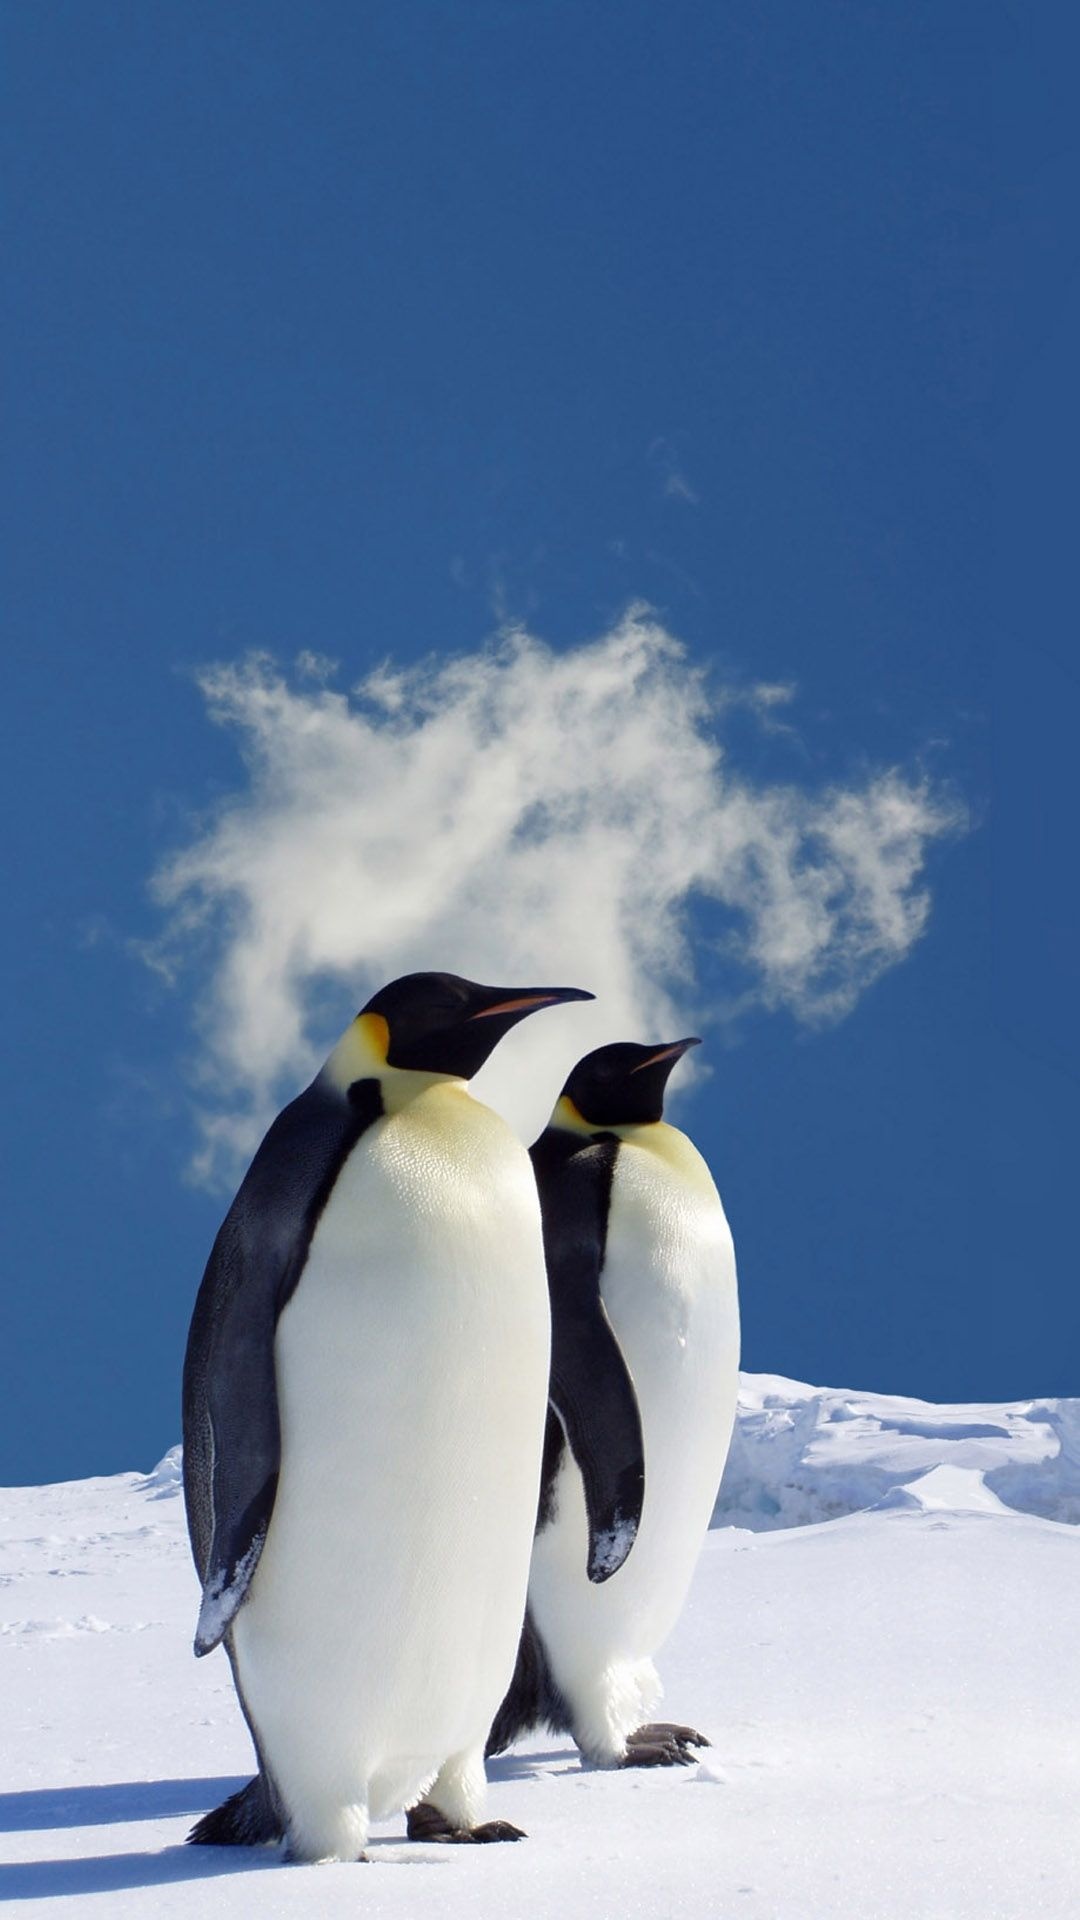 Cute penguin winter animal wallpapers, Top free backgrounds, Endearing creatures, Winter beauty, 1080x1920 Full HD Phone